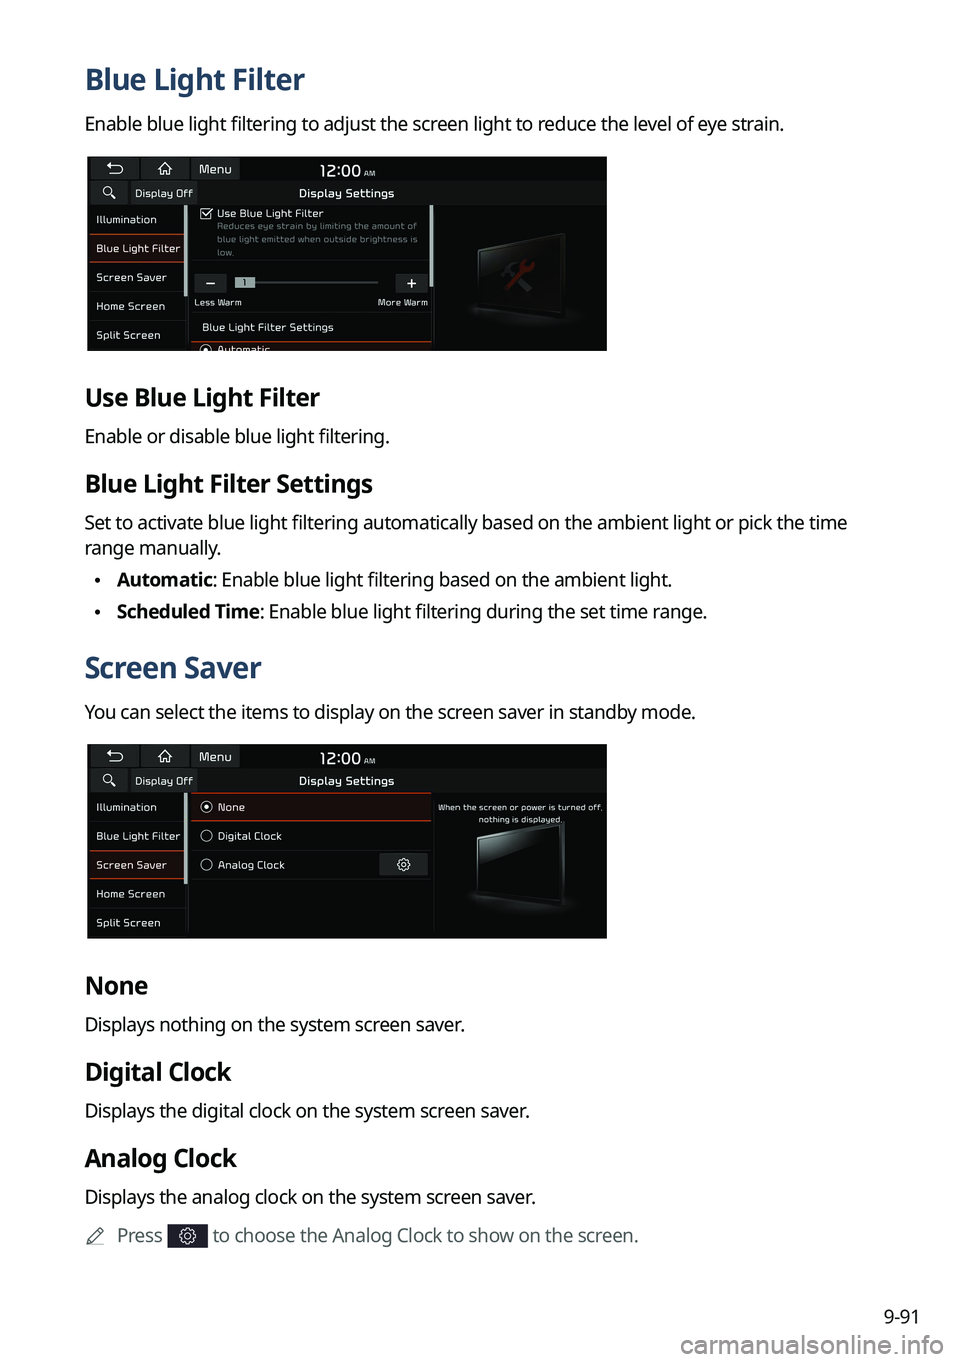 KIA SORENTO 2022  Navigation System Quick Reference Guide 9-91
Blue Light Filter
Enable blue light filtering to adjust the screen light to reduce the level of eye strain.
Use Blue Light Filter
Enable or disable blue light filtering.
Blue Light Filter Setting